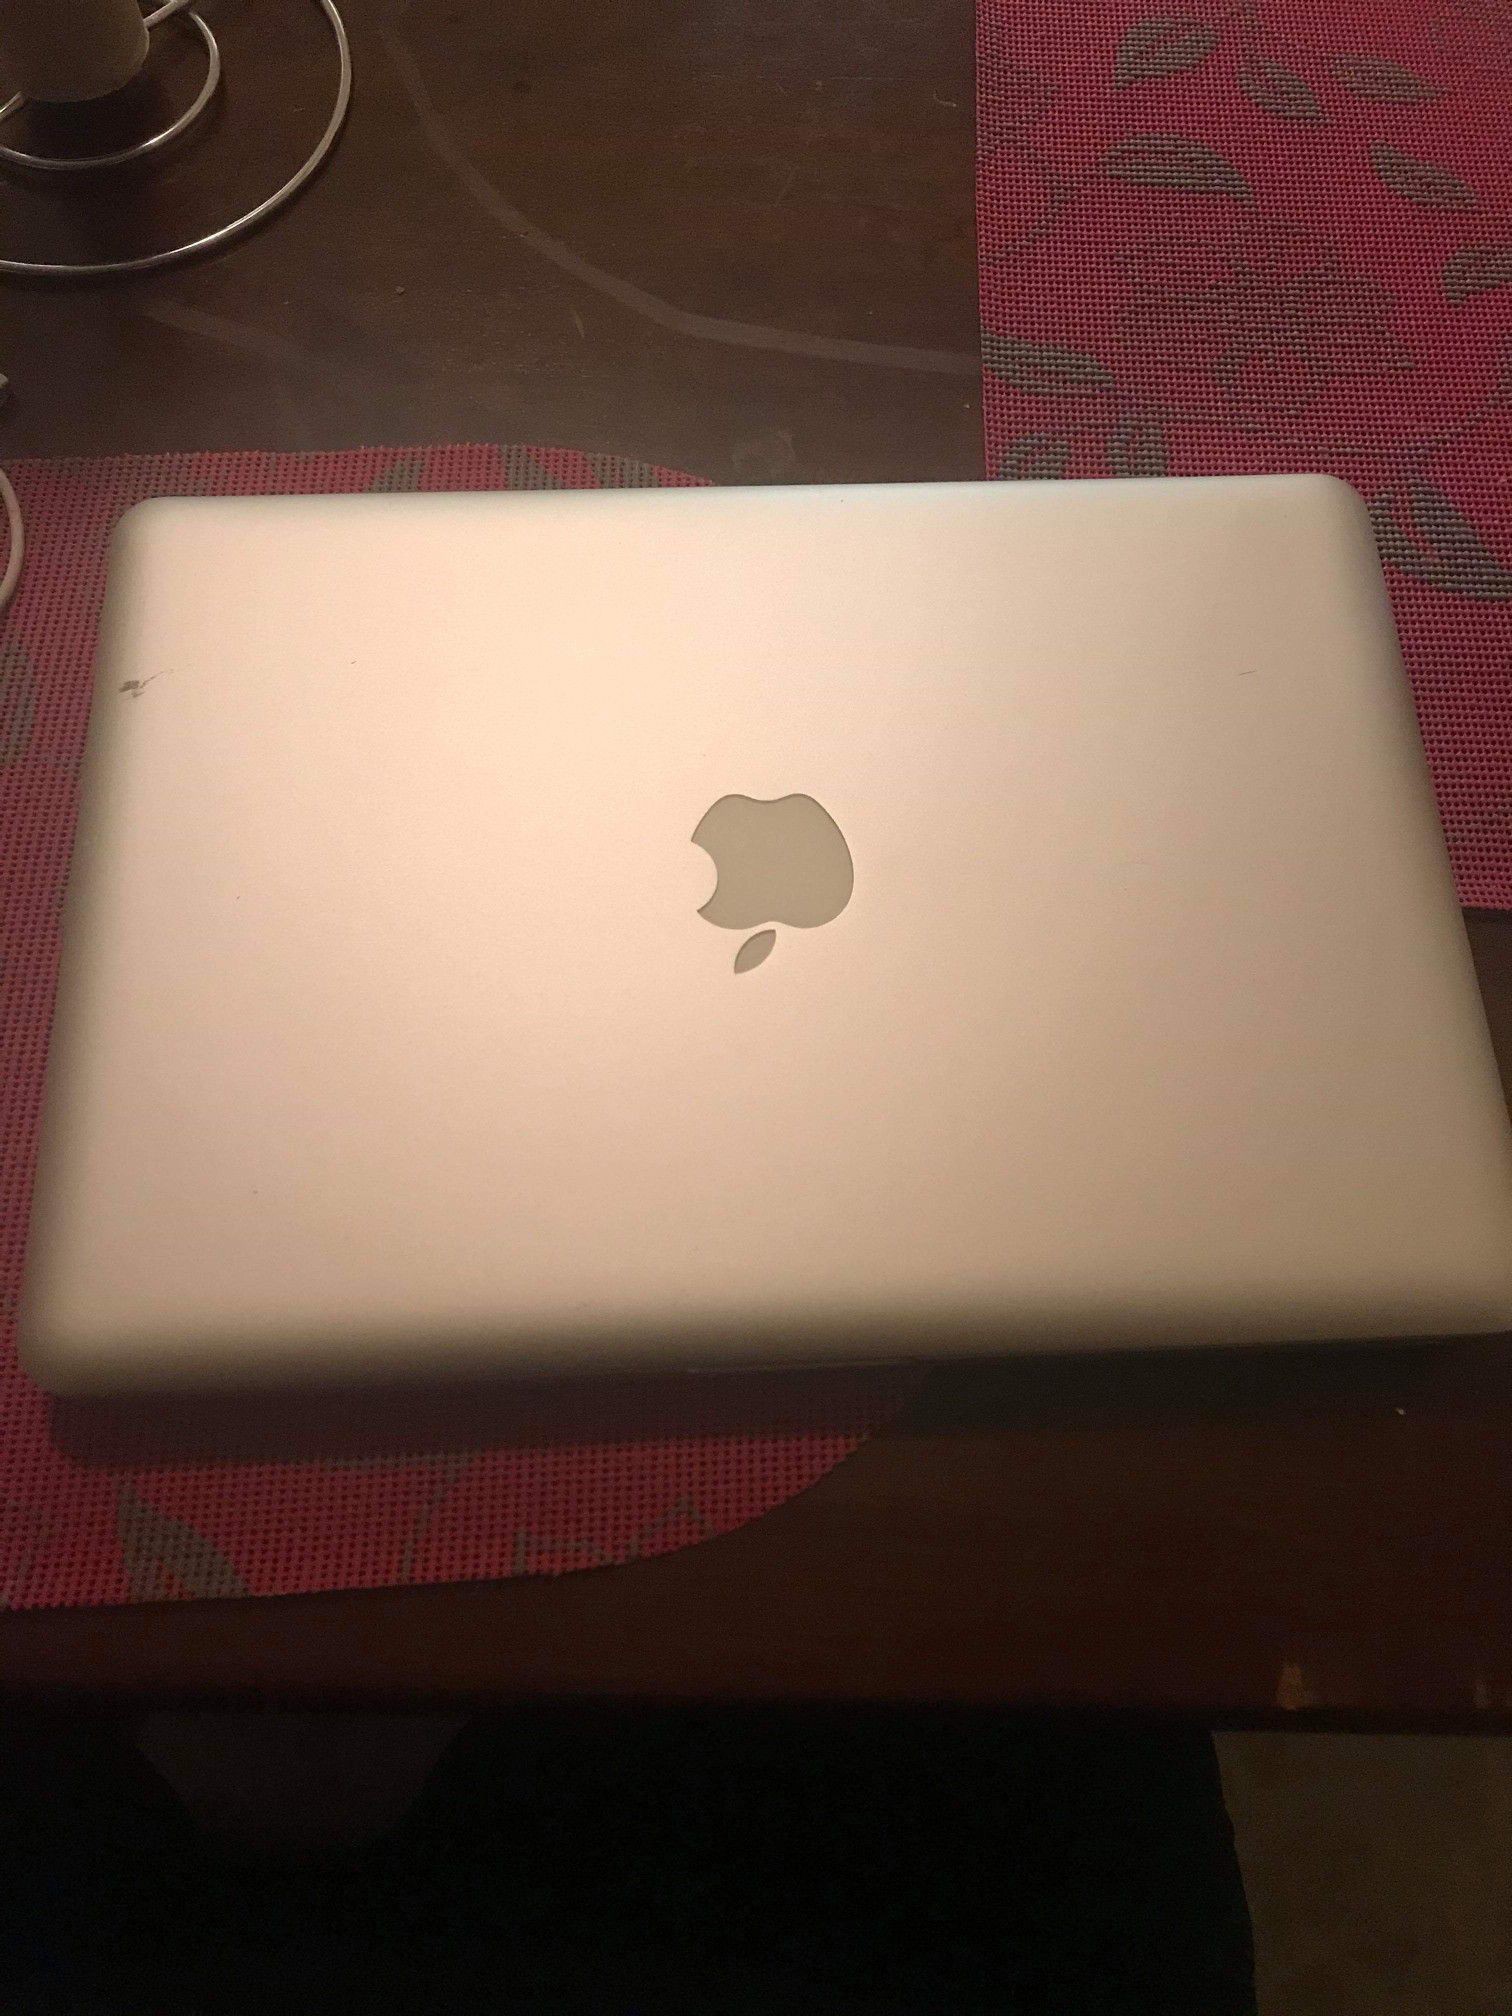 Macbook pro mid 2010 used in good condition.